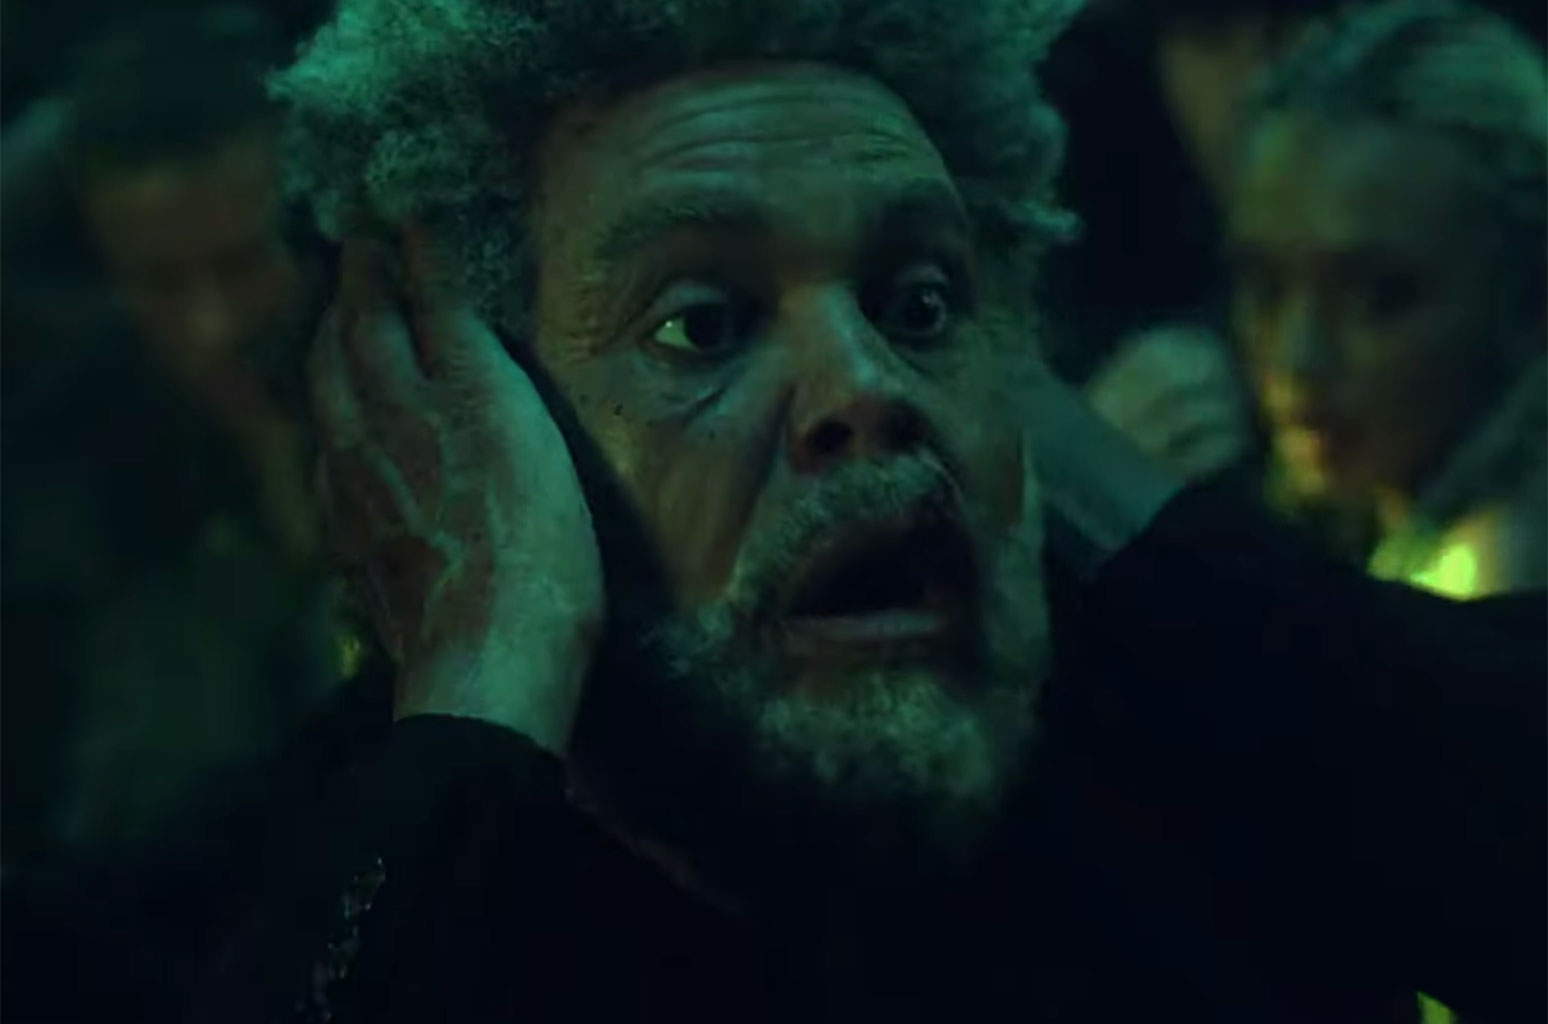 [WATCH] The Weeknd Battles Old Age Self In New “Gasoline” Video